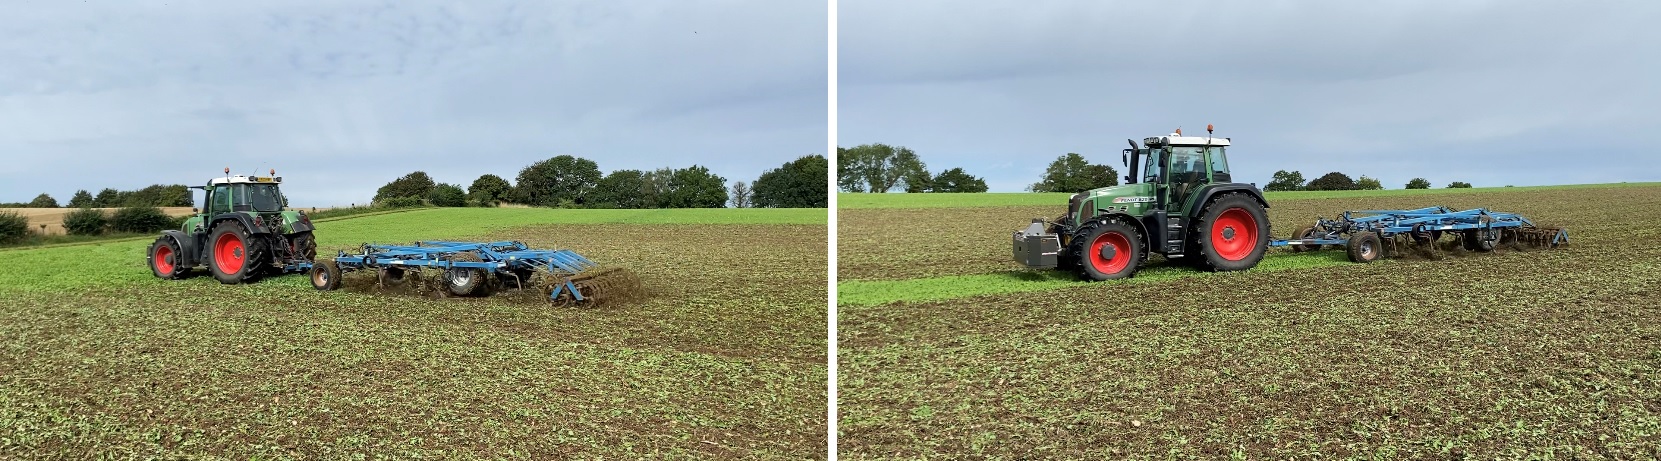 Cultivating rapeseed volunteers - before and after cultivation